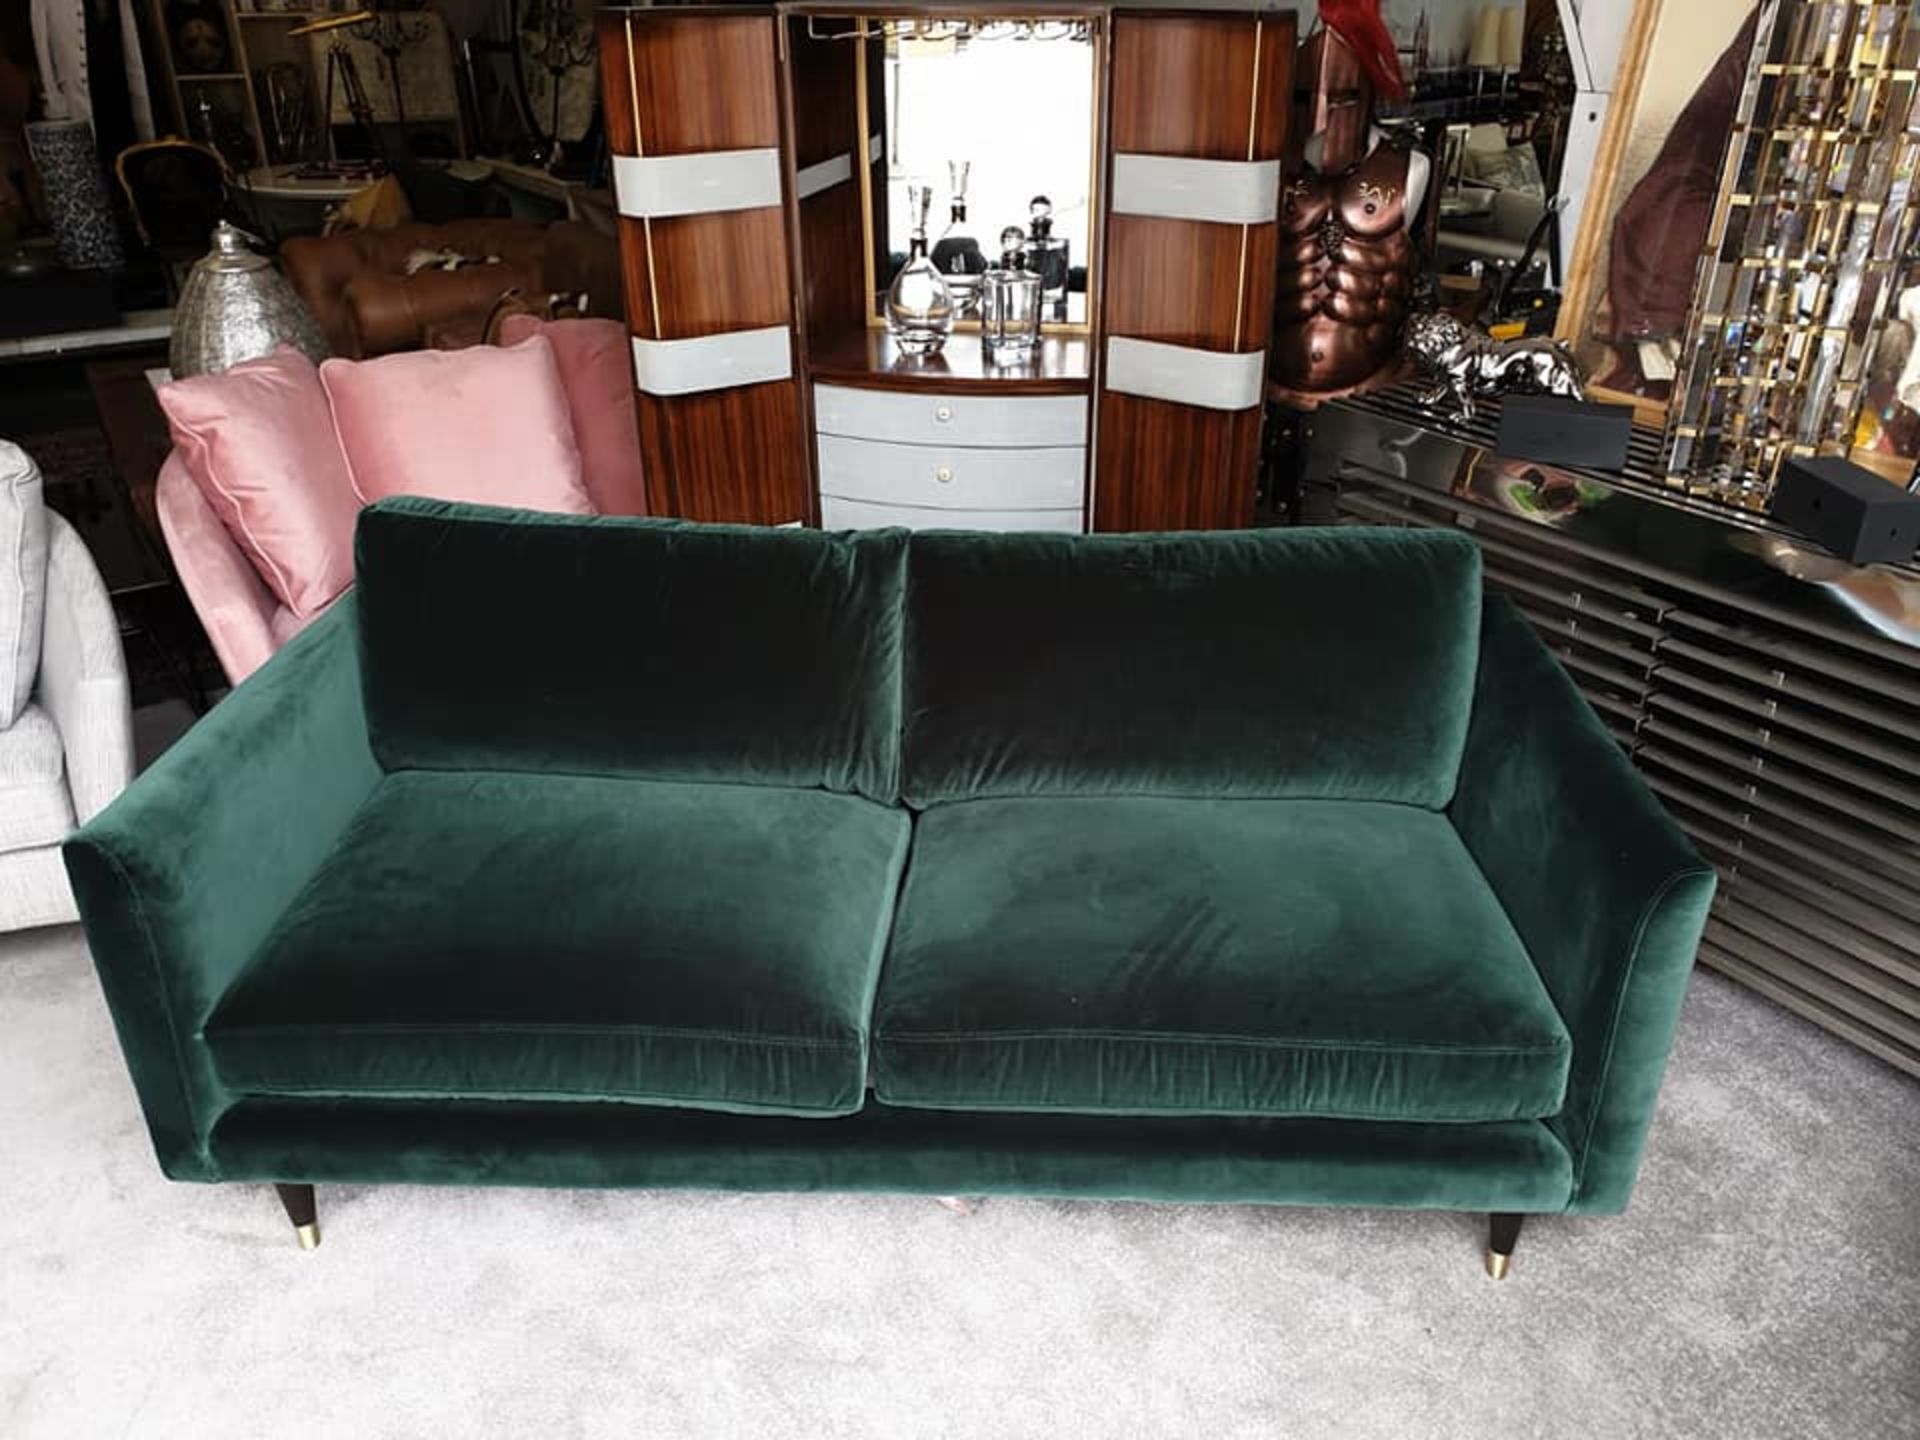 Henry 2 Seater Velvet Sofa - Emerald Green Henry By Christiane Lemieux Is A Contemporary Sofa With